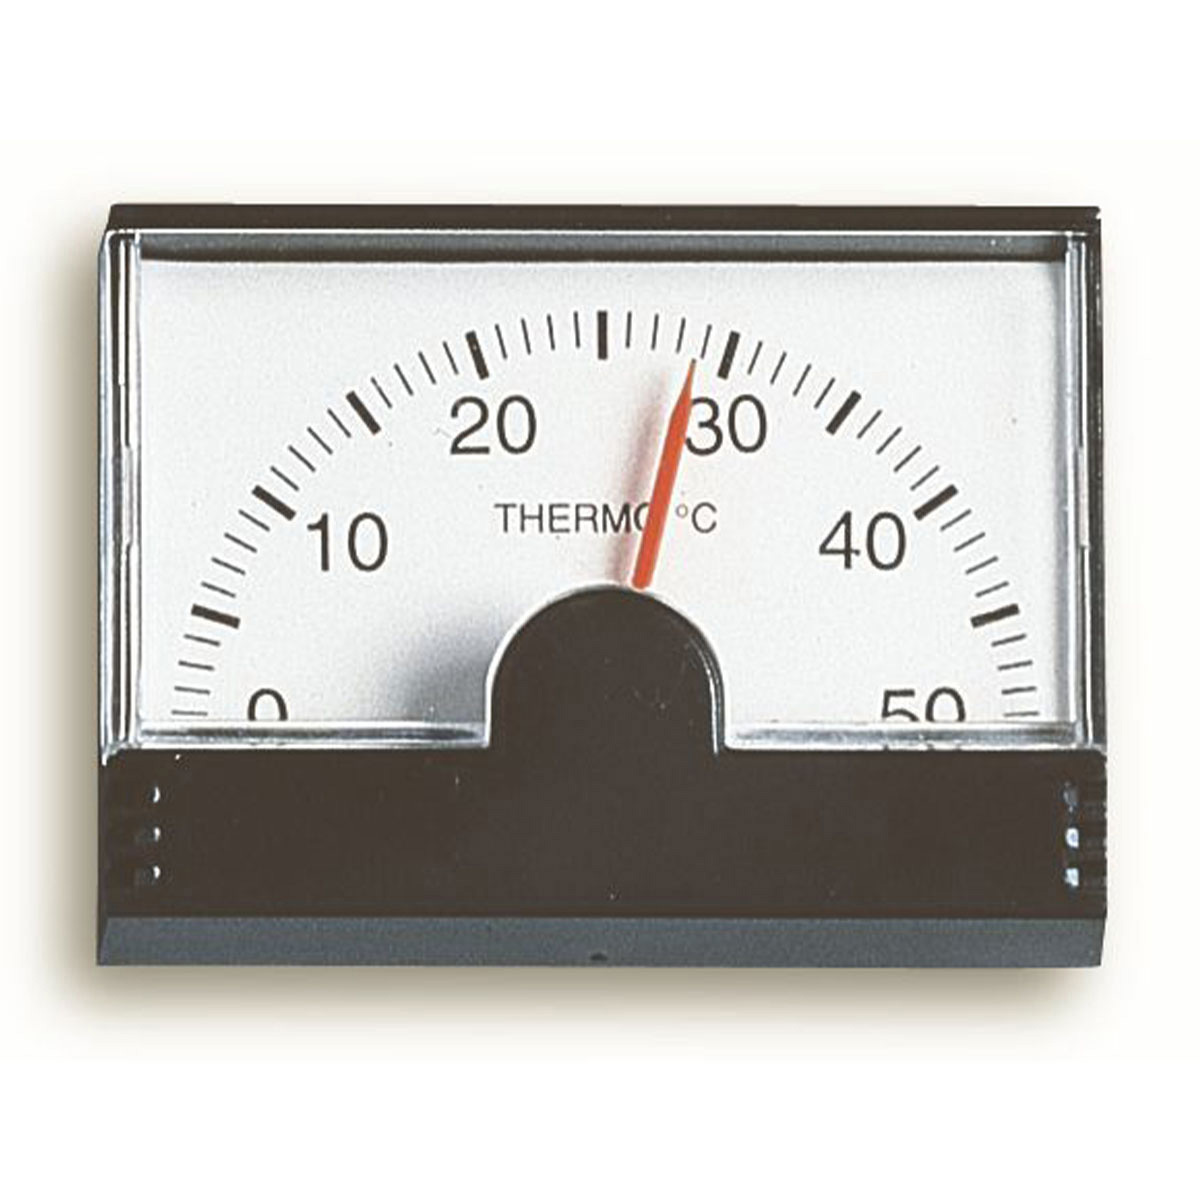 Alles für's Auge - Autothermometer analog Kunststoff Thermometer Pkw Kfz  Innenthermometer